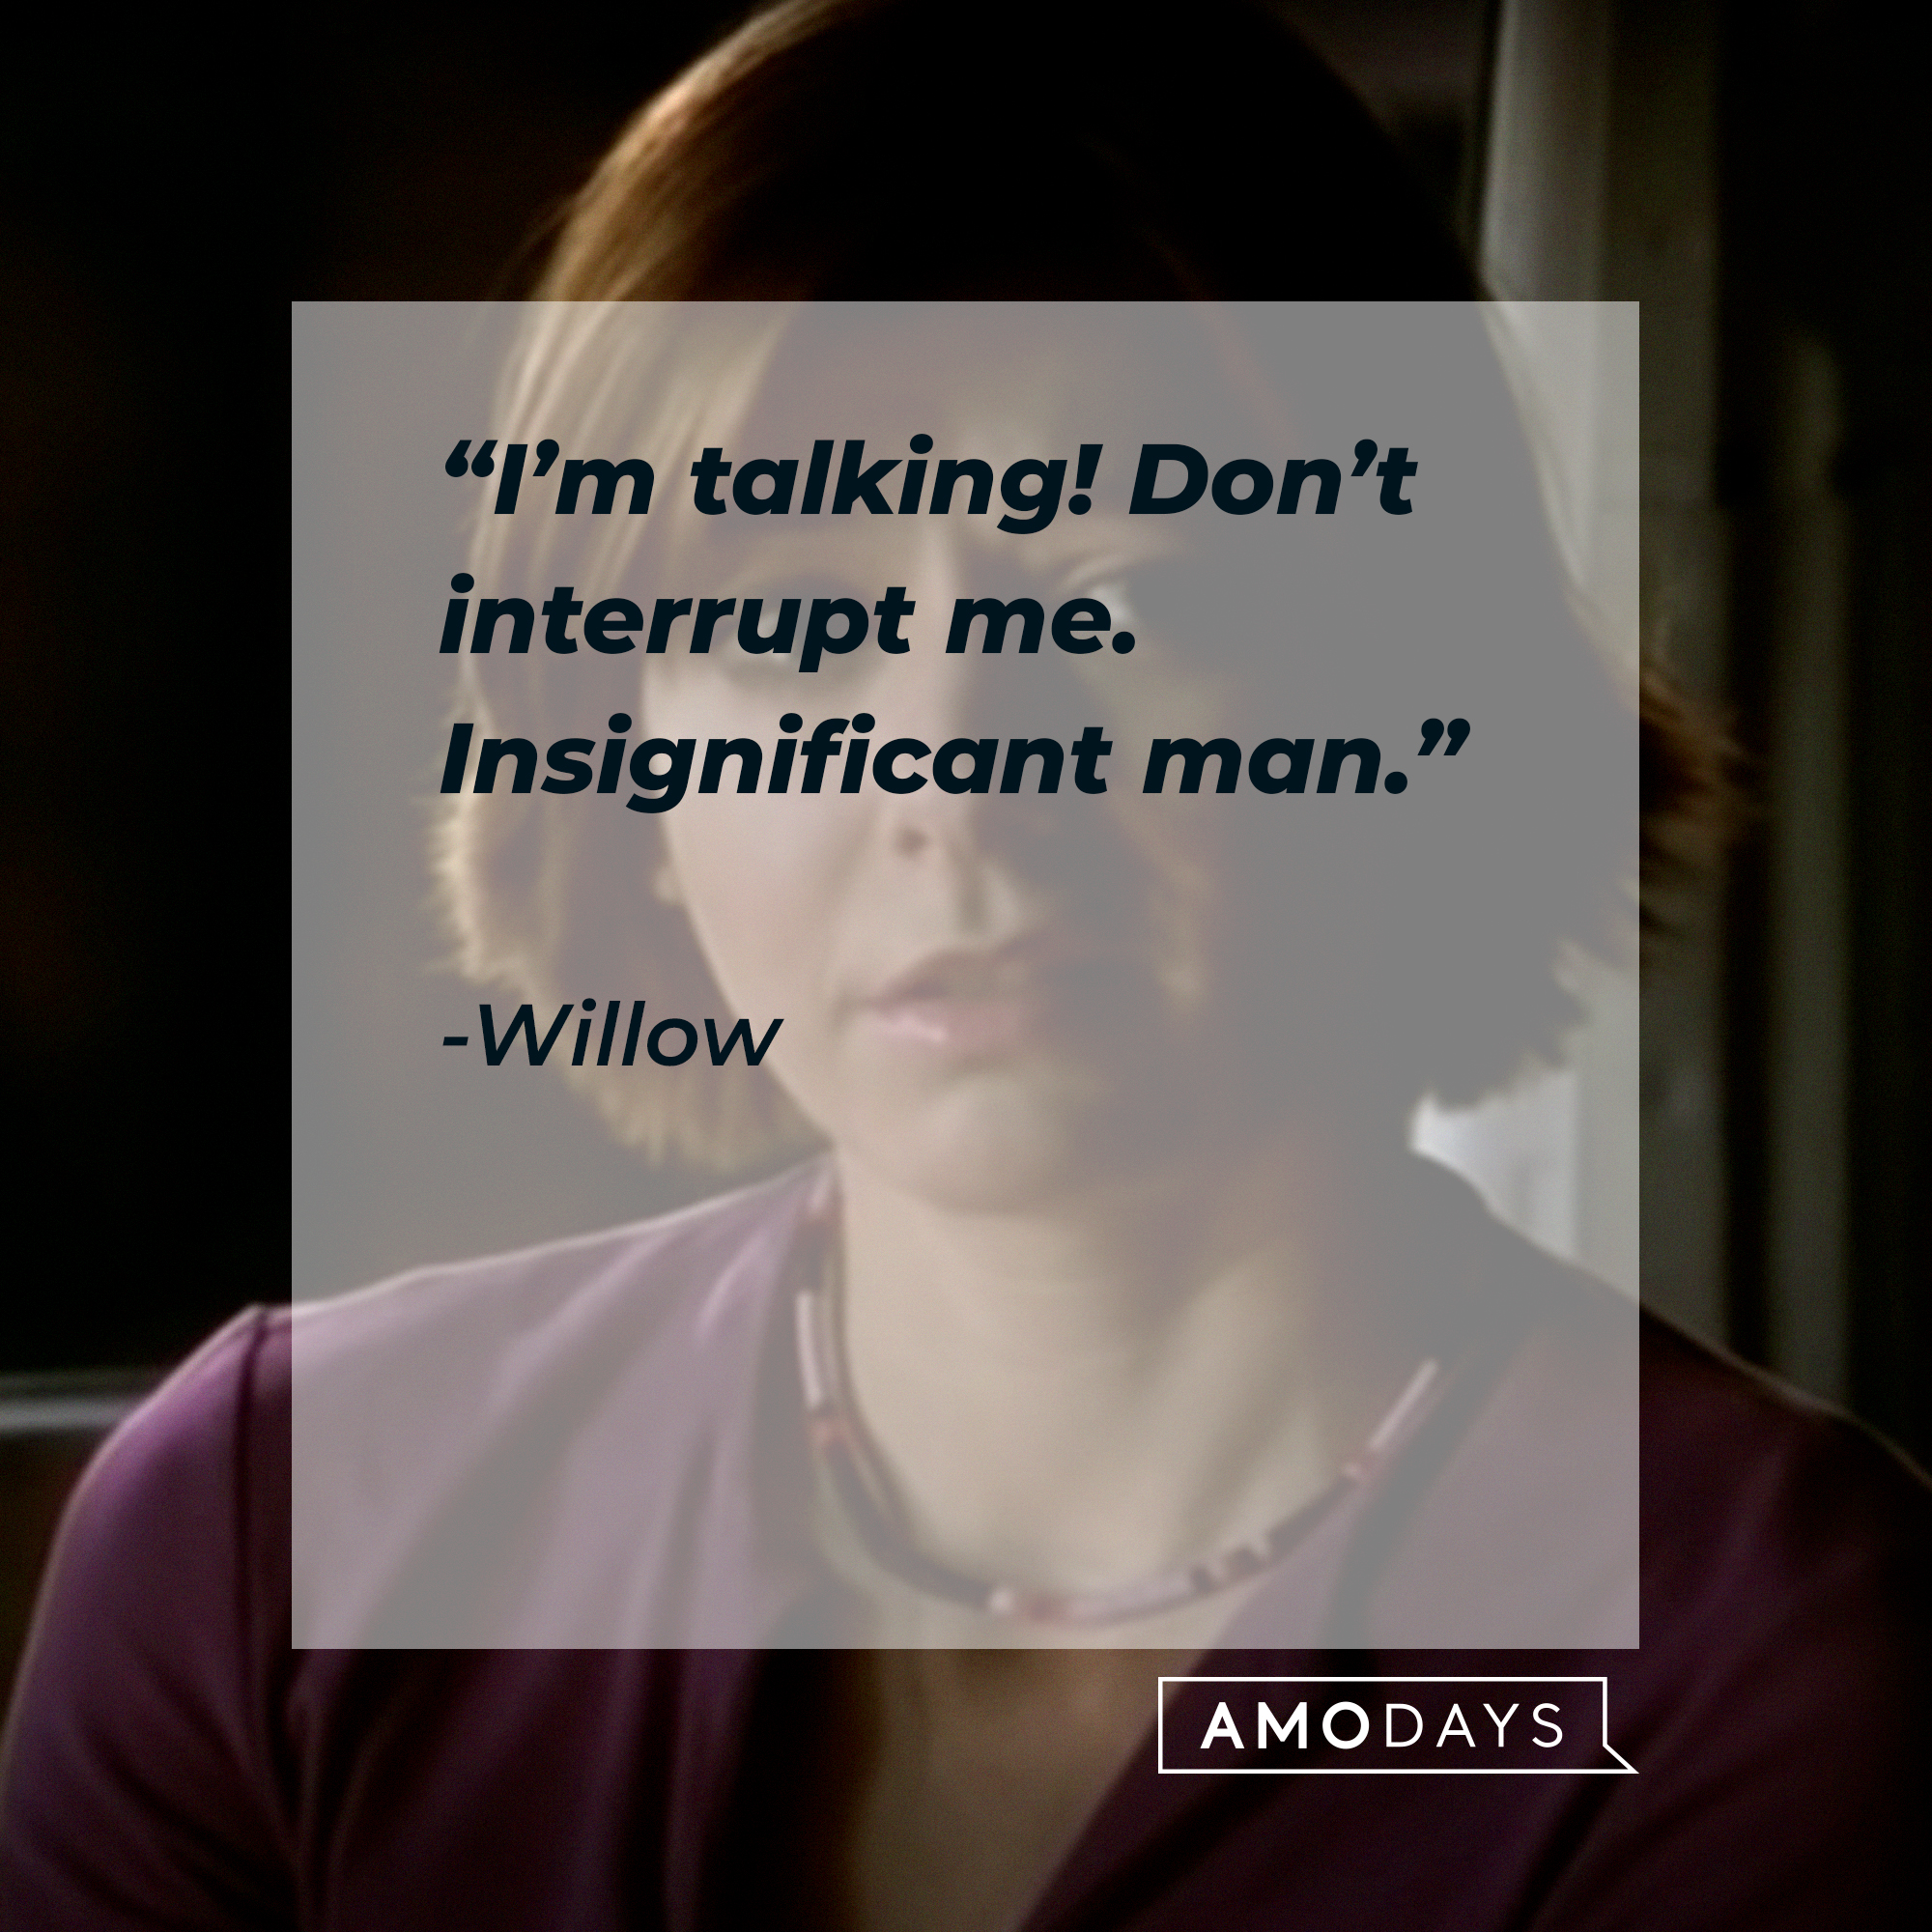 Willow, with her quote:  “I’m talking! Don’t interrupt me. Insignificant man.”  | Source: facebook.com/BuffyTheVampireSlayer